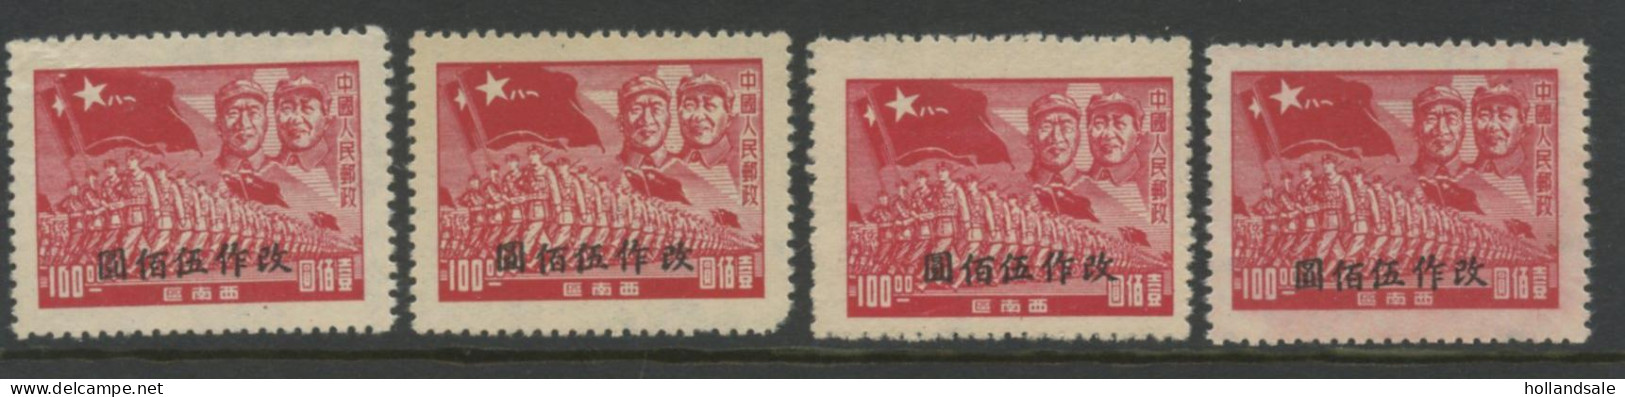 CHINA SOUTH WEST - 1950 $500 On $100 MICHEL # 36. Four (4) X. Unused. - Zuidwest-China  1949-50